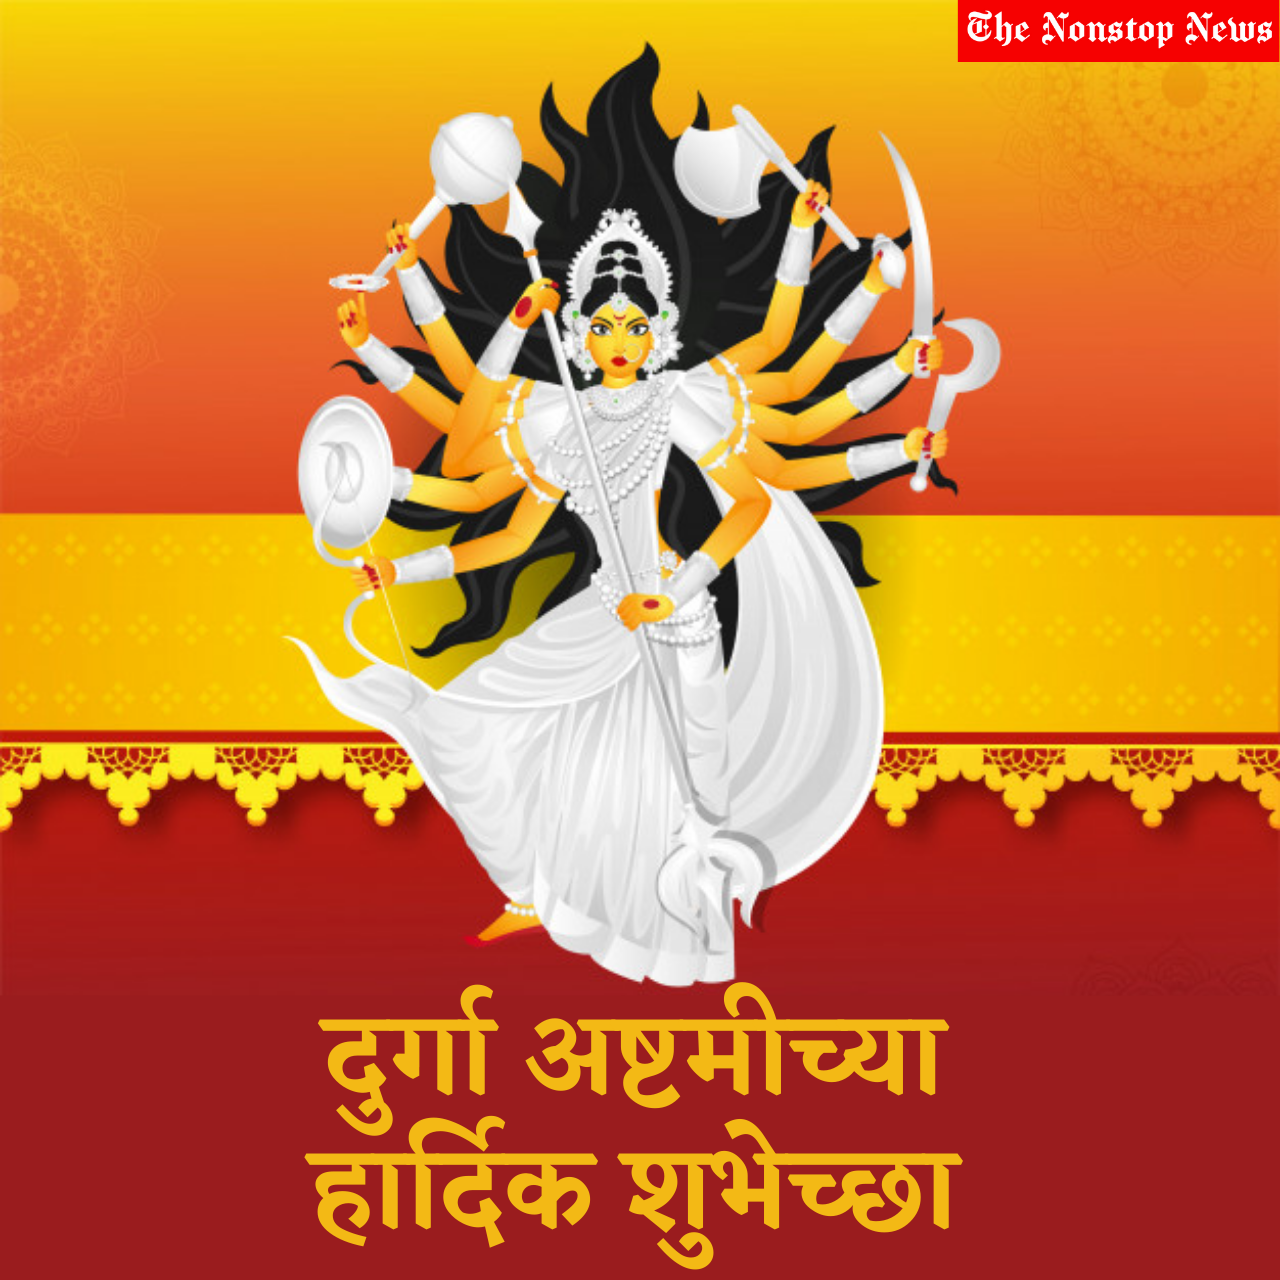 Happy Durga Ashtami 2021 Wishes In Marathi Messages, Greetings, Quotes, and Images to share